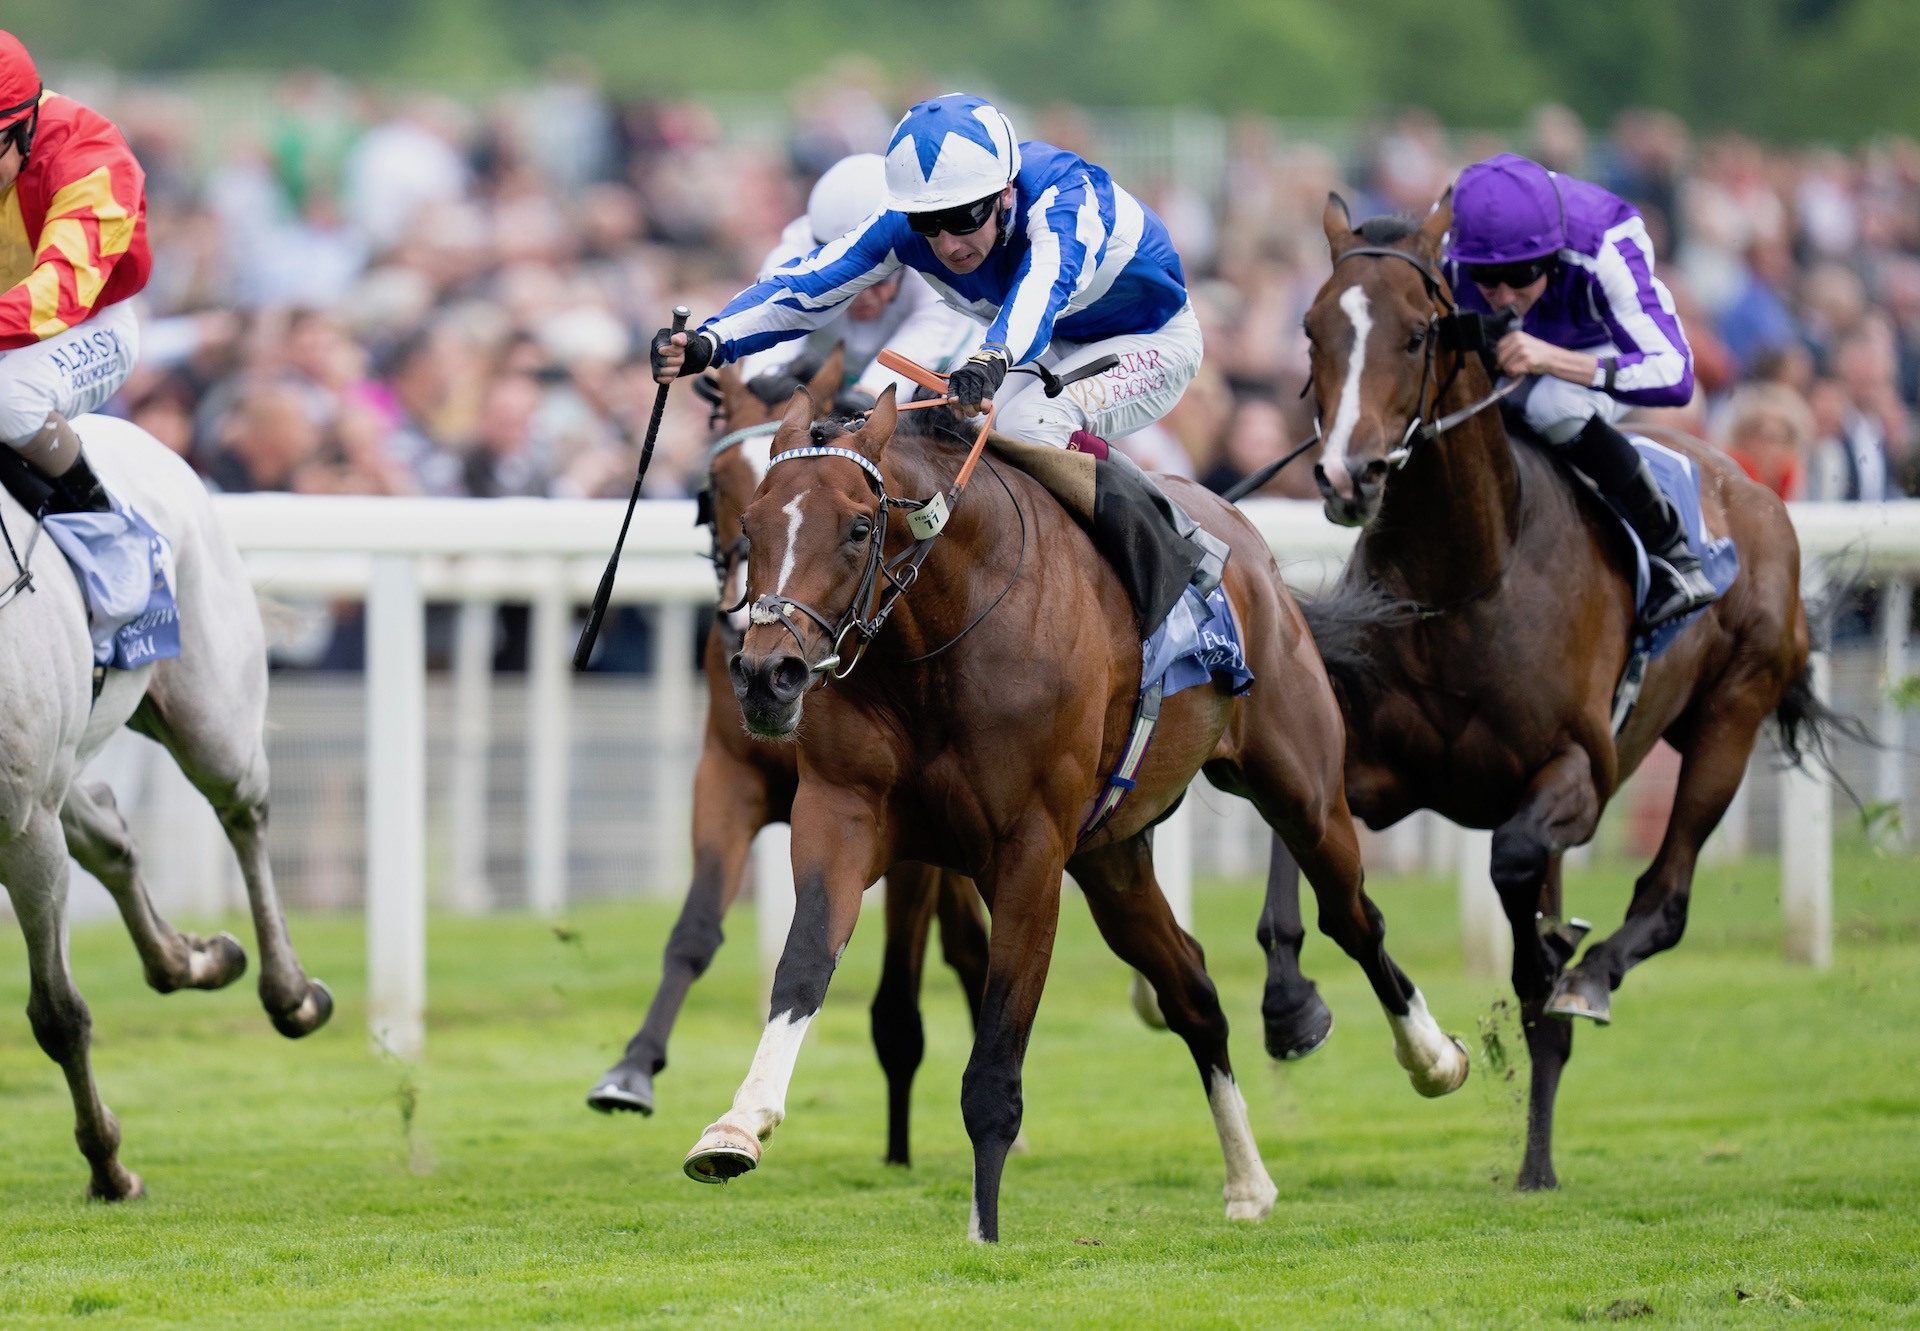 The Foxes (Churchill) Wins The Group 2 Dante Stakes at York